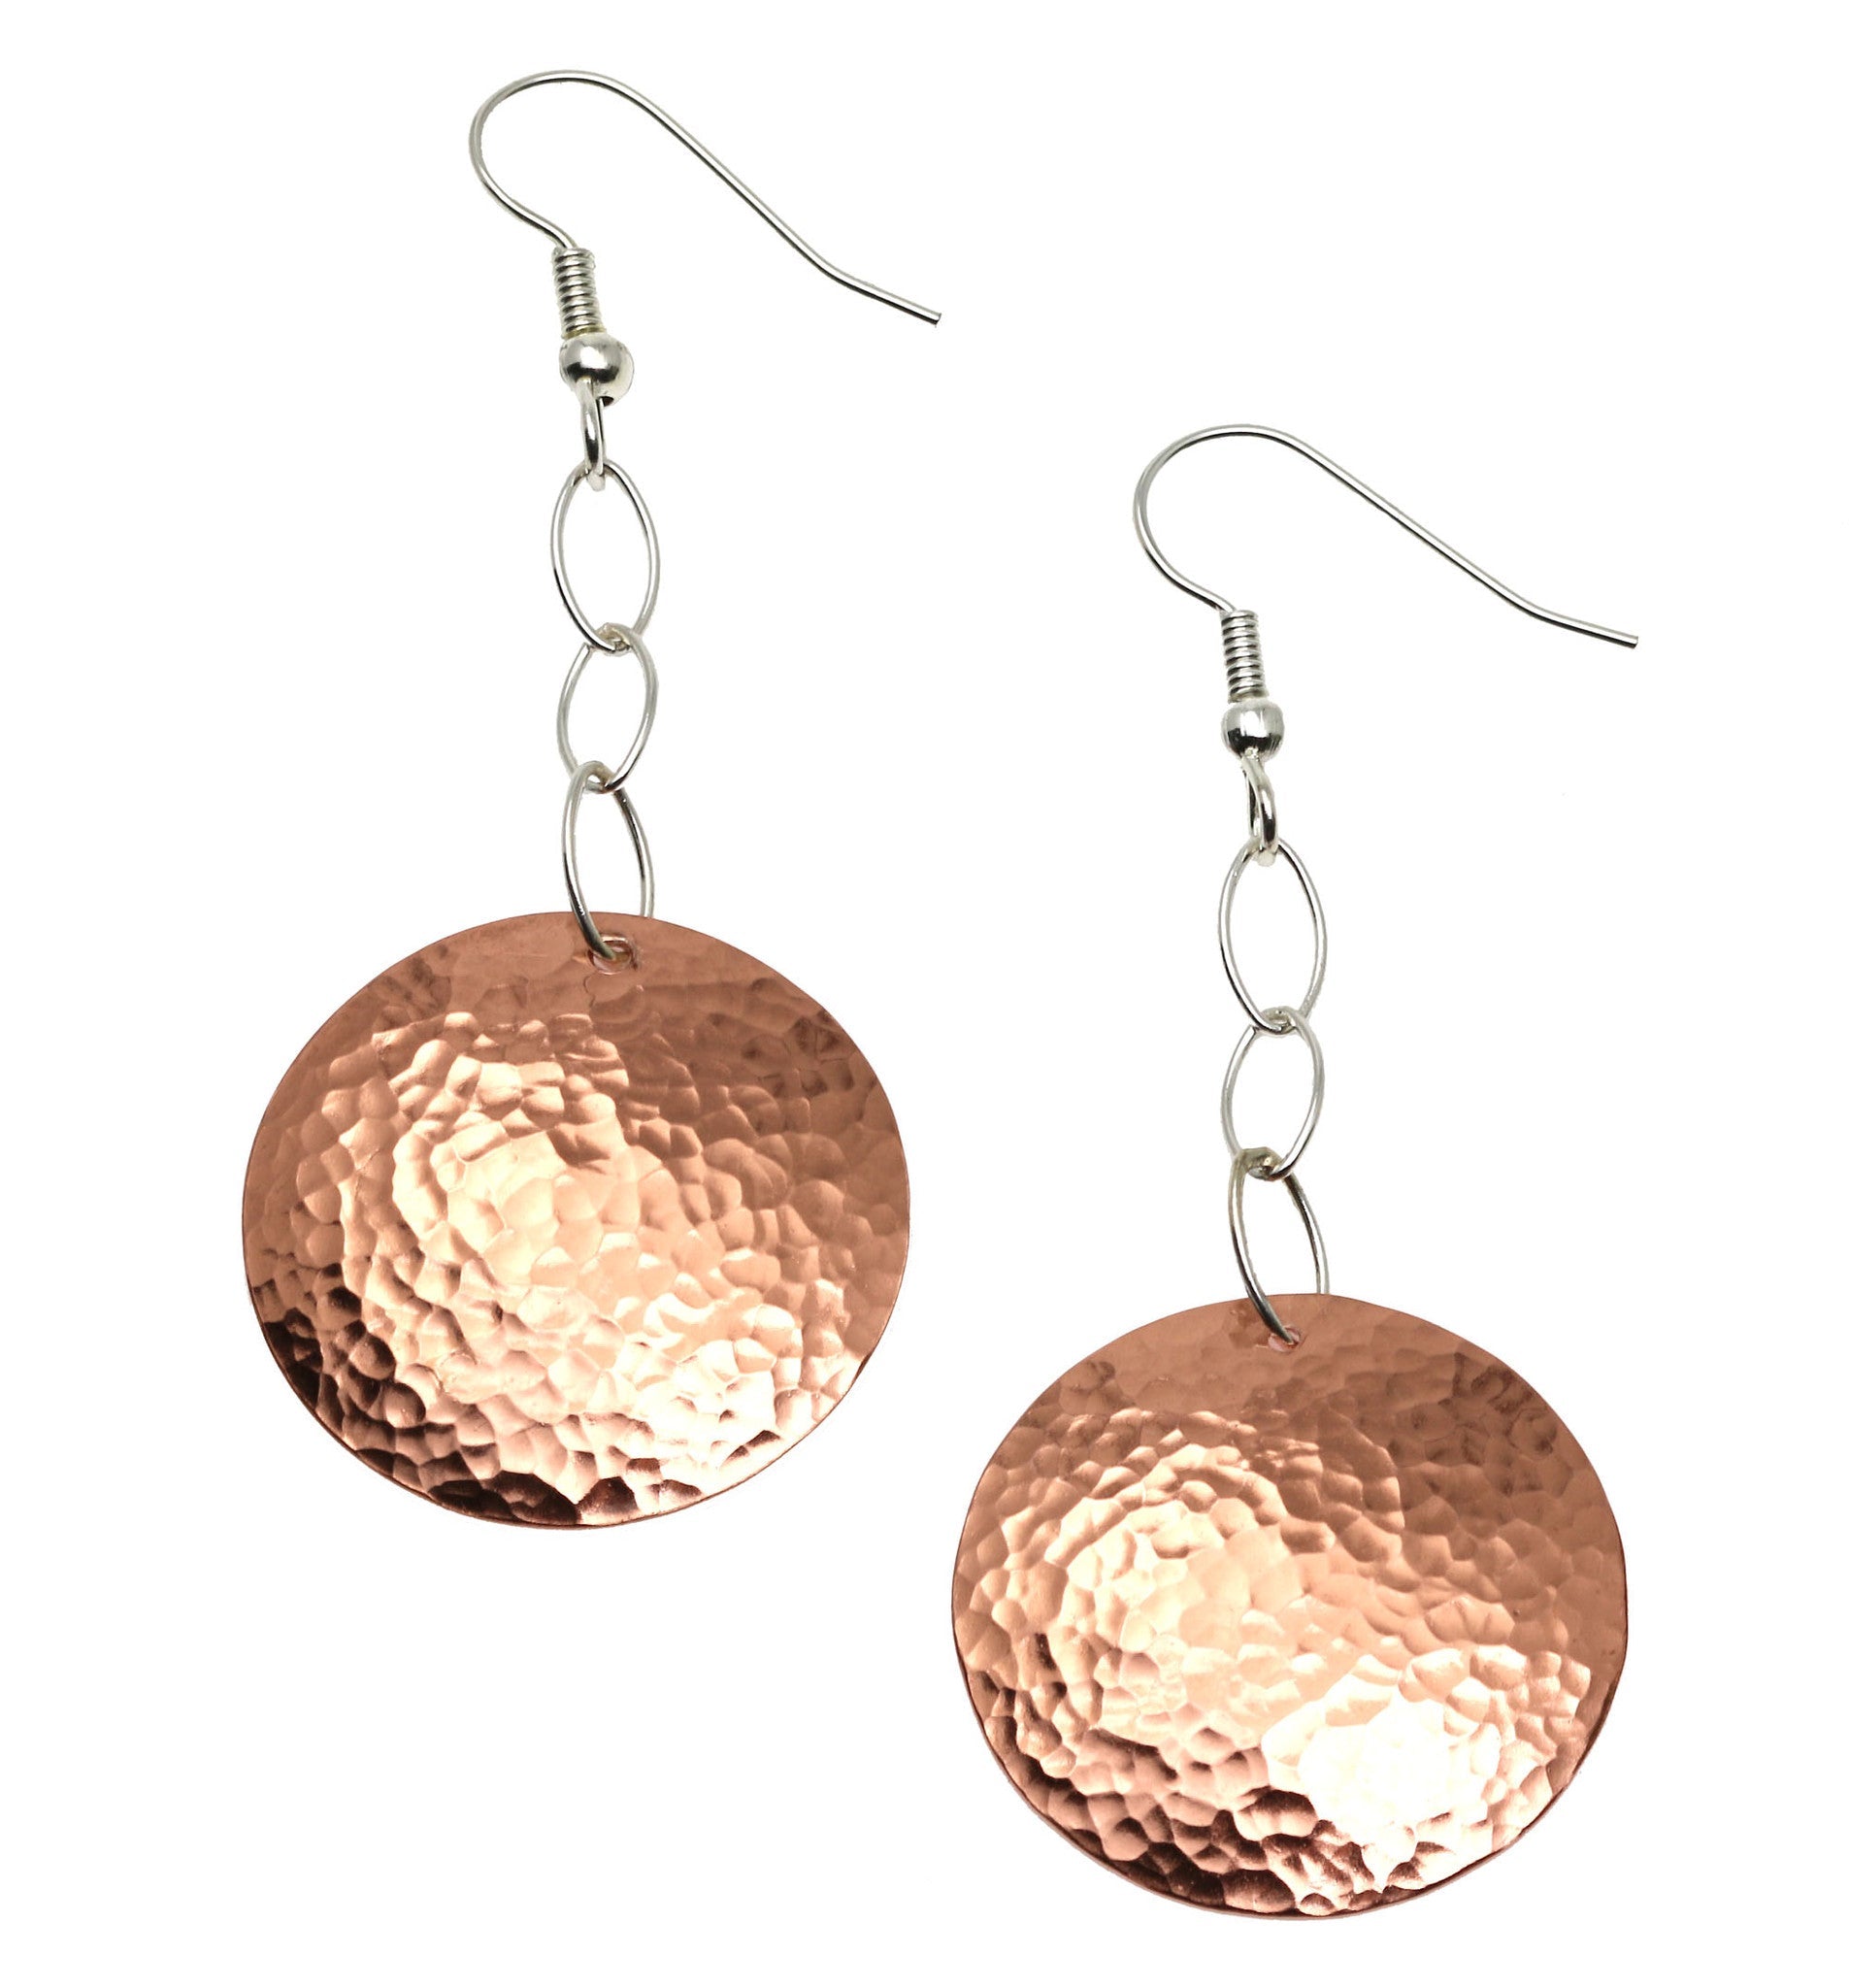 33% Off Hammered Copper Disc Earrings - Deal of the Week